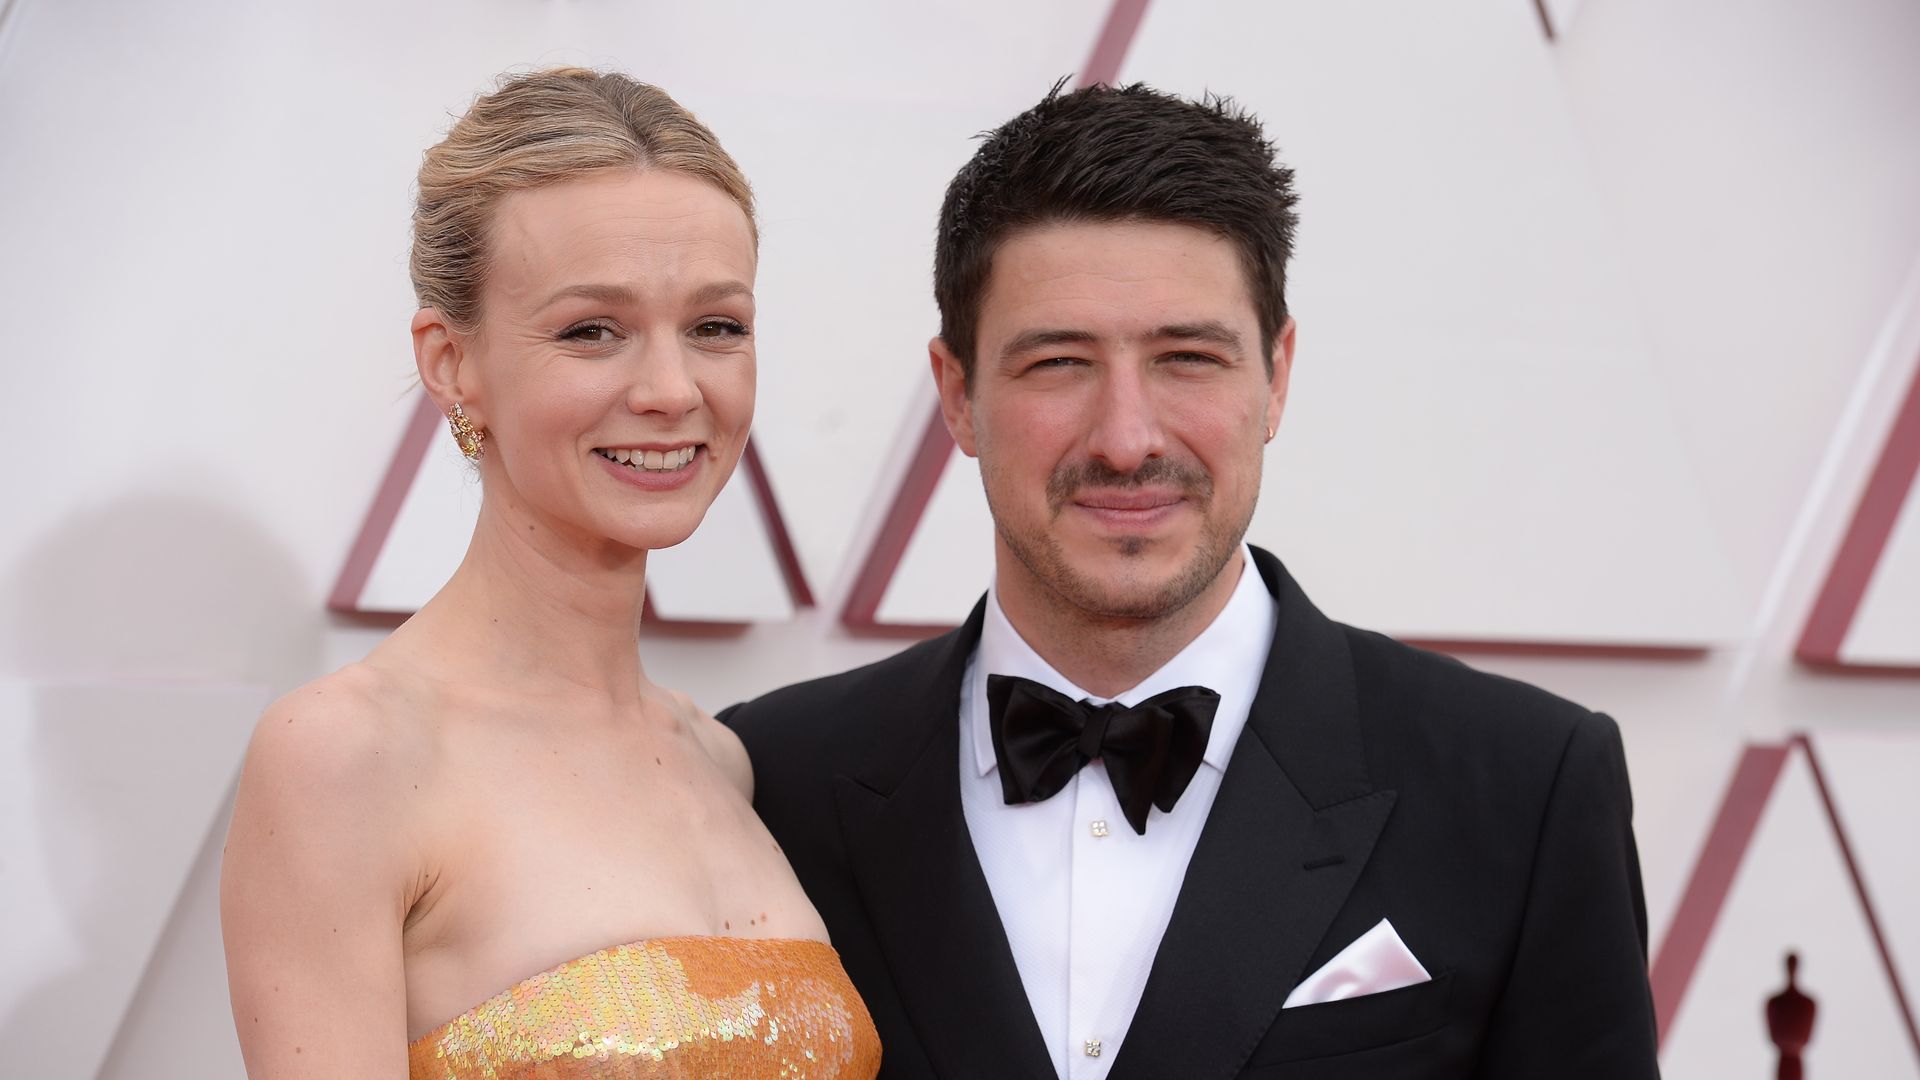 THE OSCARSÂ® - The 93rd Oscars will be held on Sunday, April 25, 2021, at Union Station Los Angeles and the DolbyÂ® Theatre at Hollywood & Highland CenterÂ® in Hollywood, and international locations via satellite. 
CAREY MULLIGAN, MARCUS MUMFORD